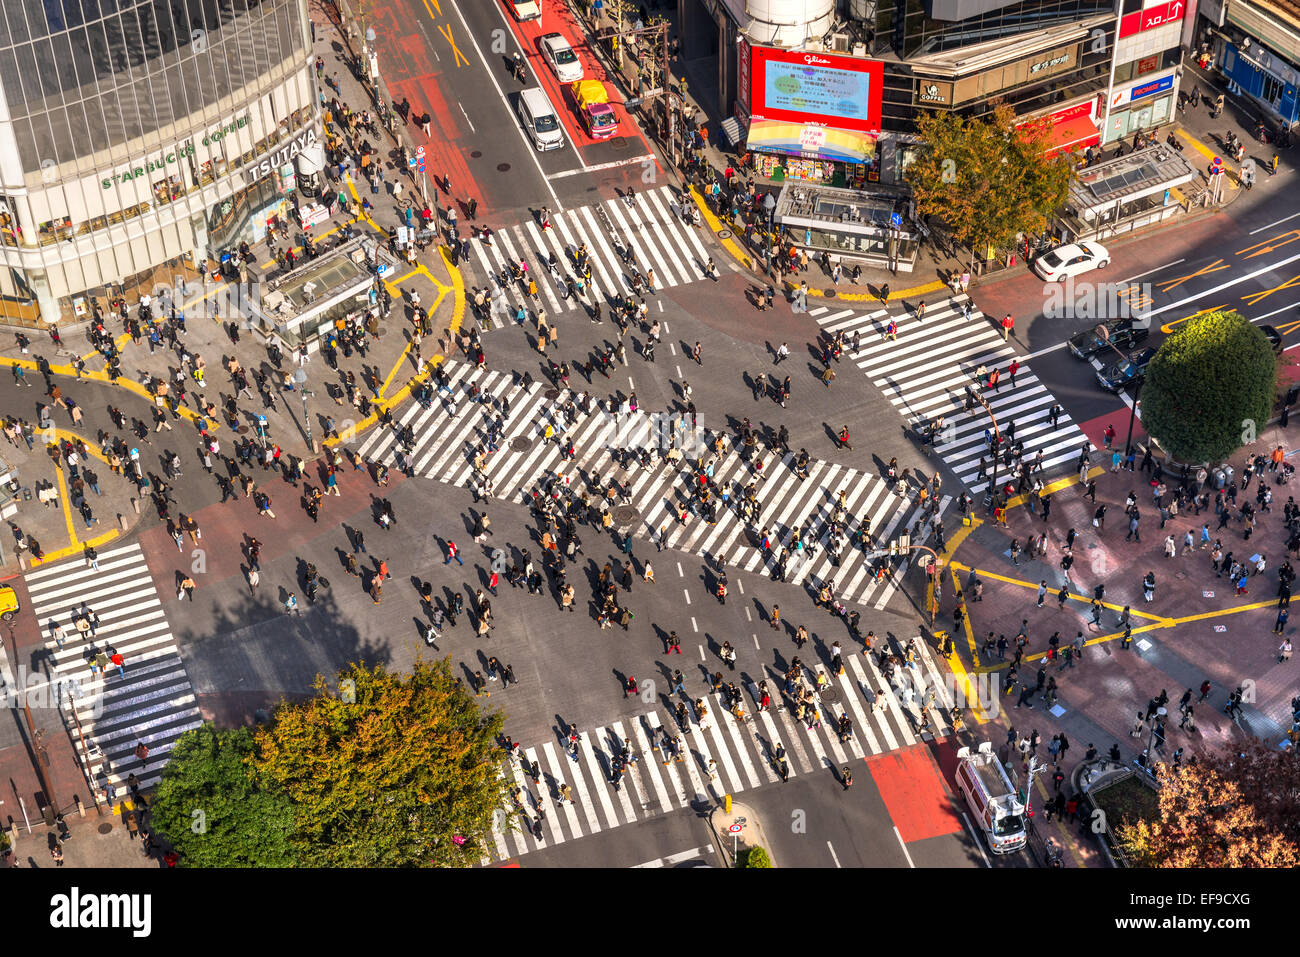 TOKYO - NOVEMBER 15: Shibuya Crossing November 12, 2014 in Tokyo, Japan. The crossing is one of the world's most well known exam Stock Photo